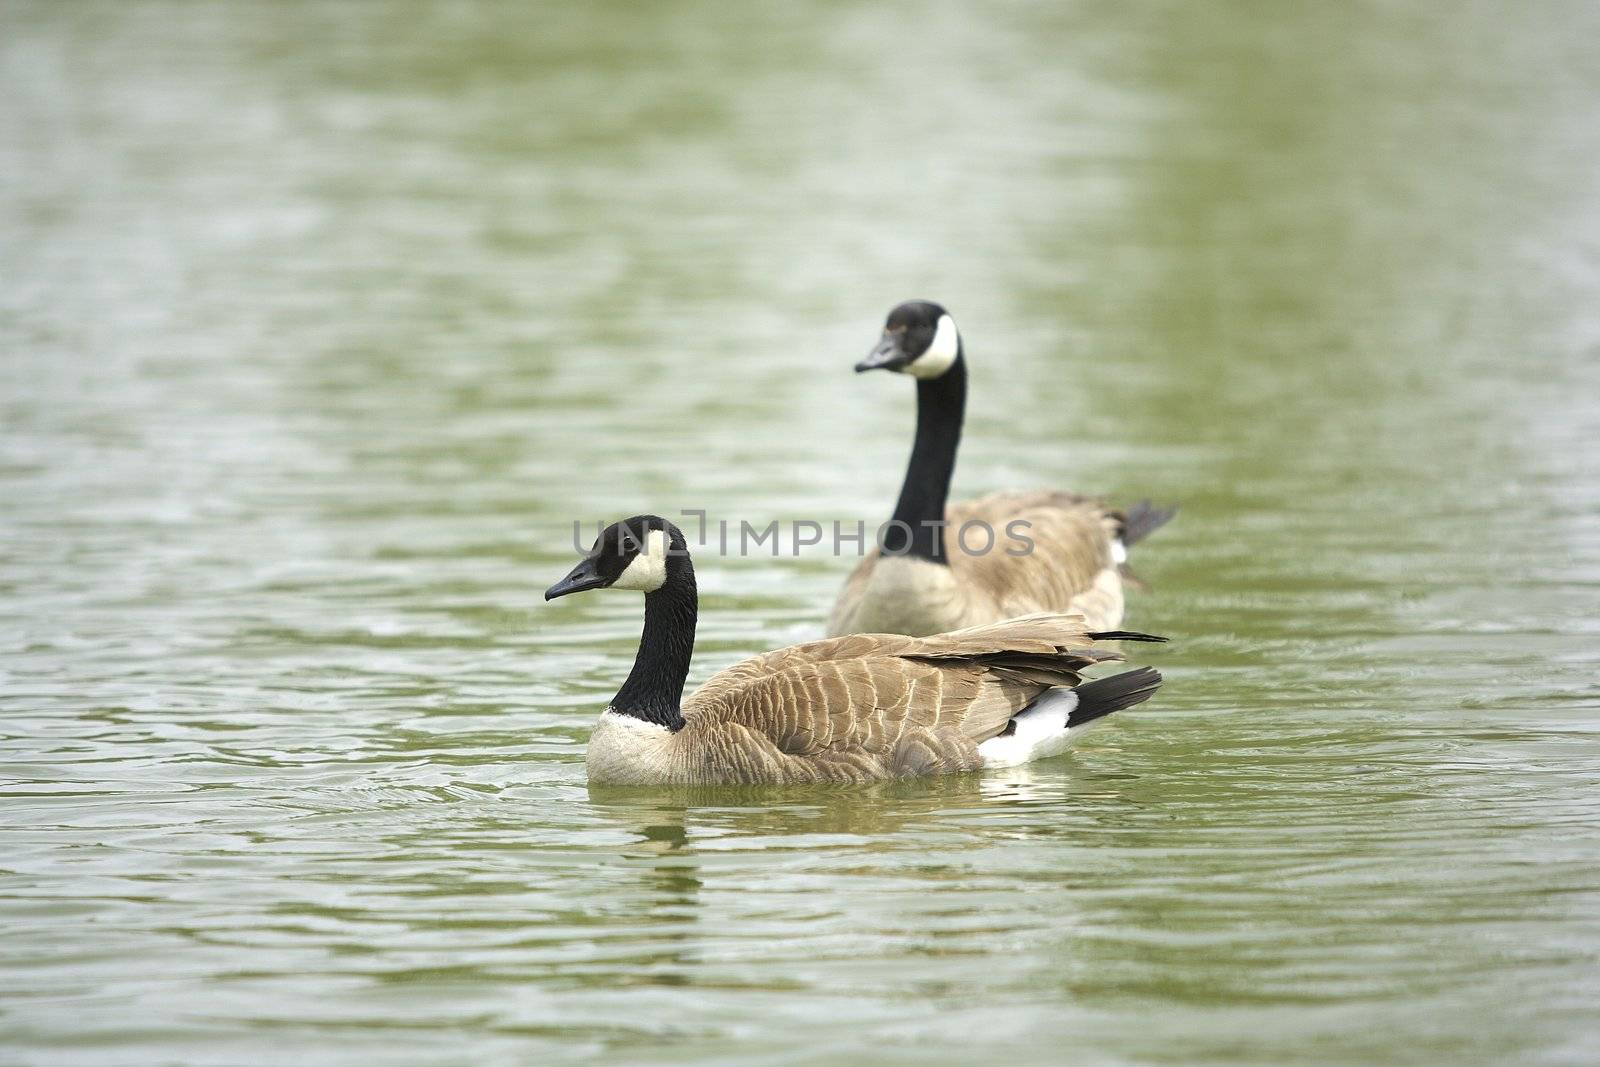 Two Canada geese in a pond